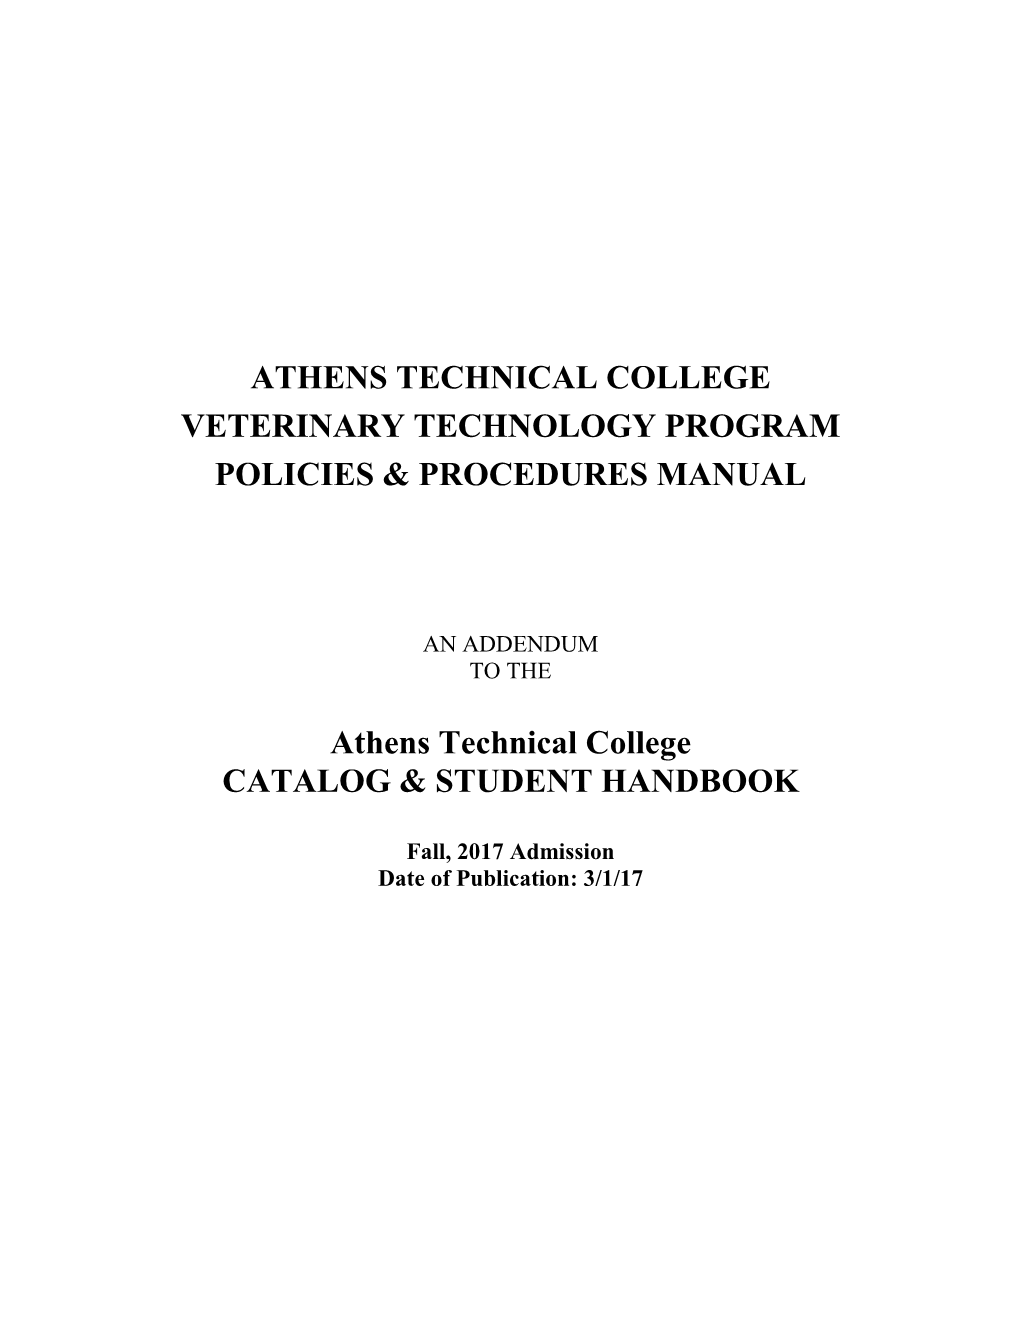 Athens Technical College Veterinary Technology Program Policies & Procedures Manual